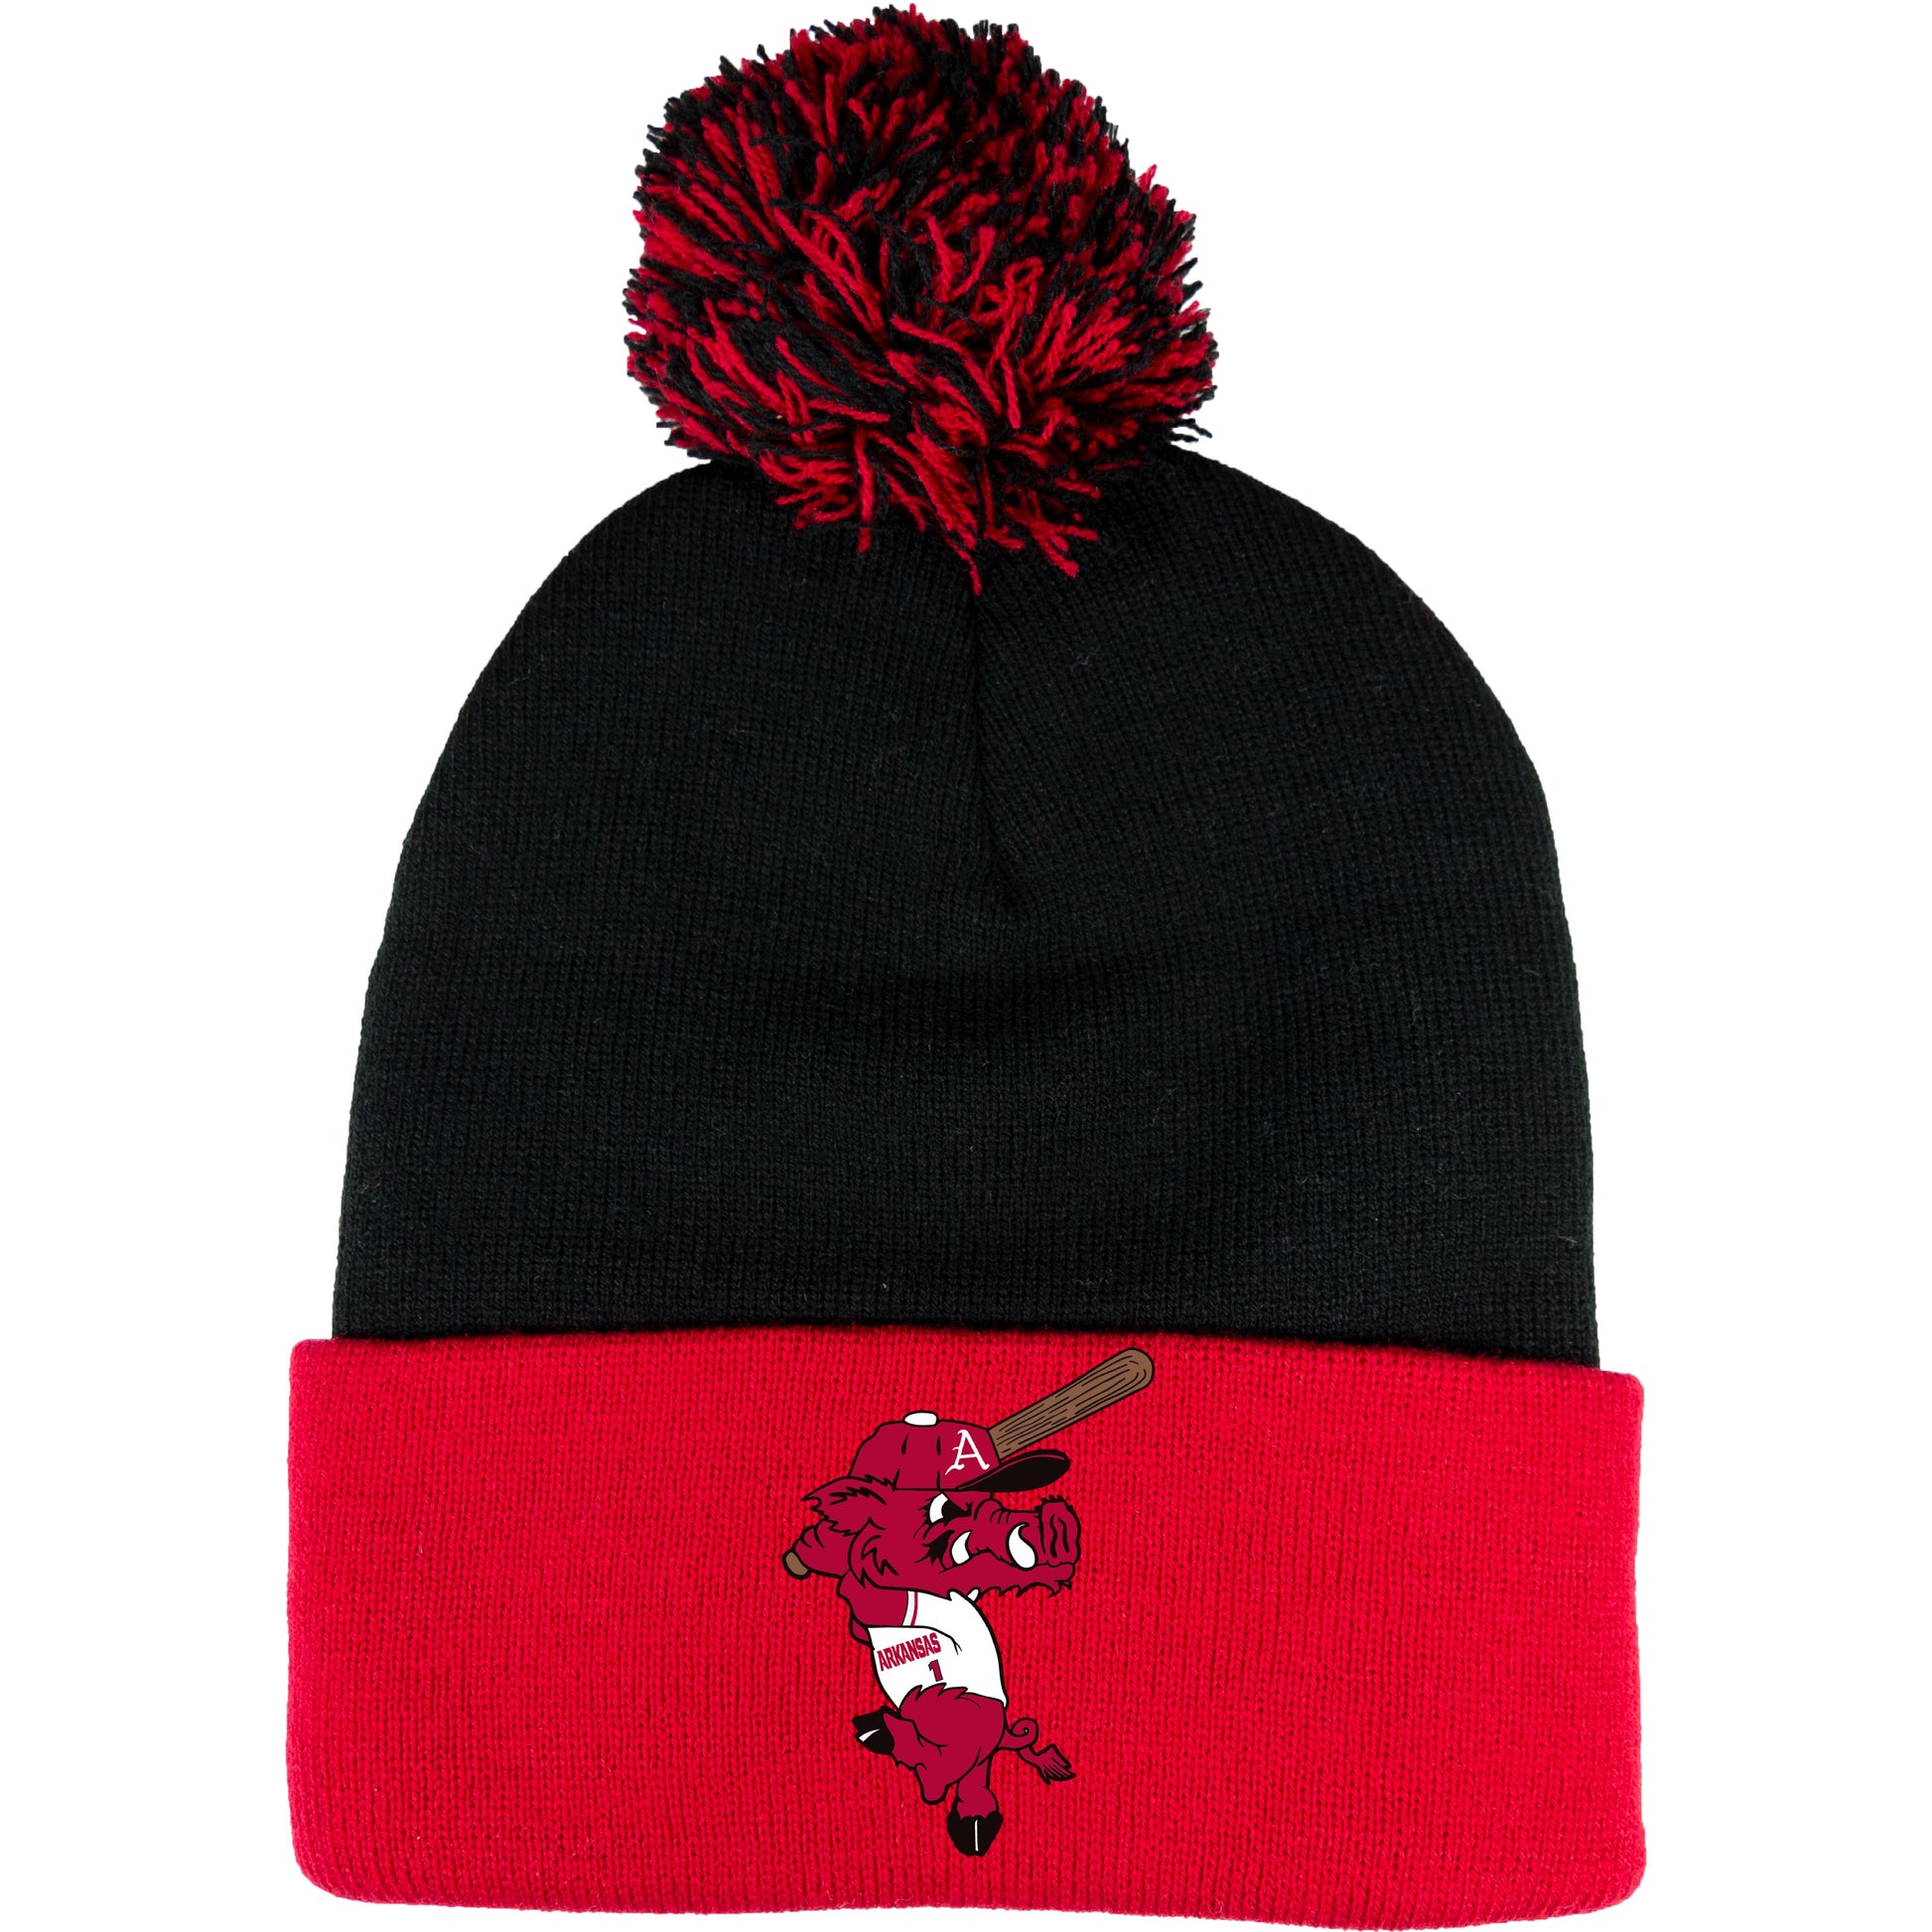 Ribby at Bat 12 in Knit Pom-Pom Top Beanie- Black/ Red - Ten Gallon Hat Co.